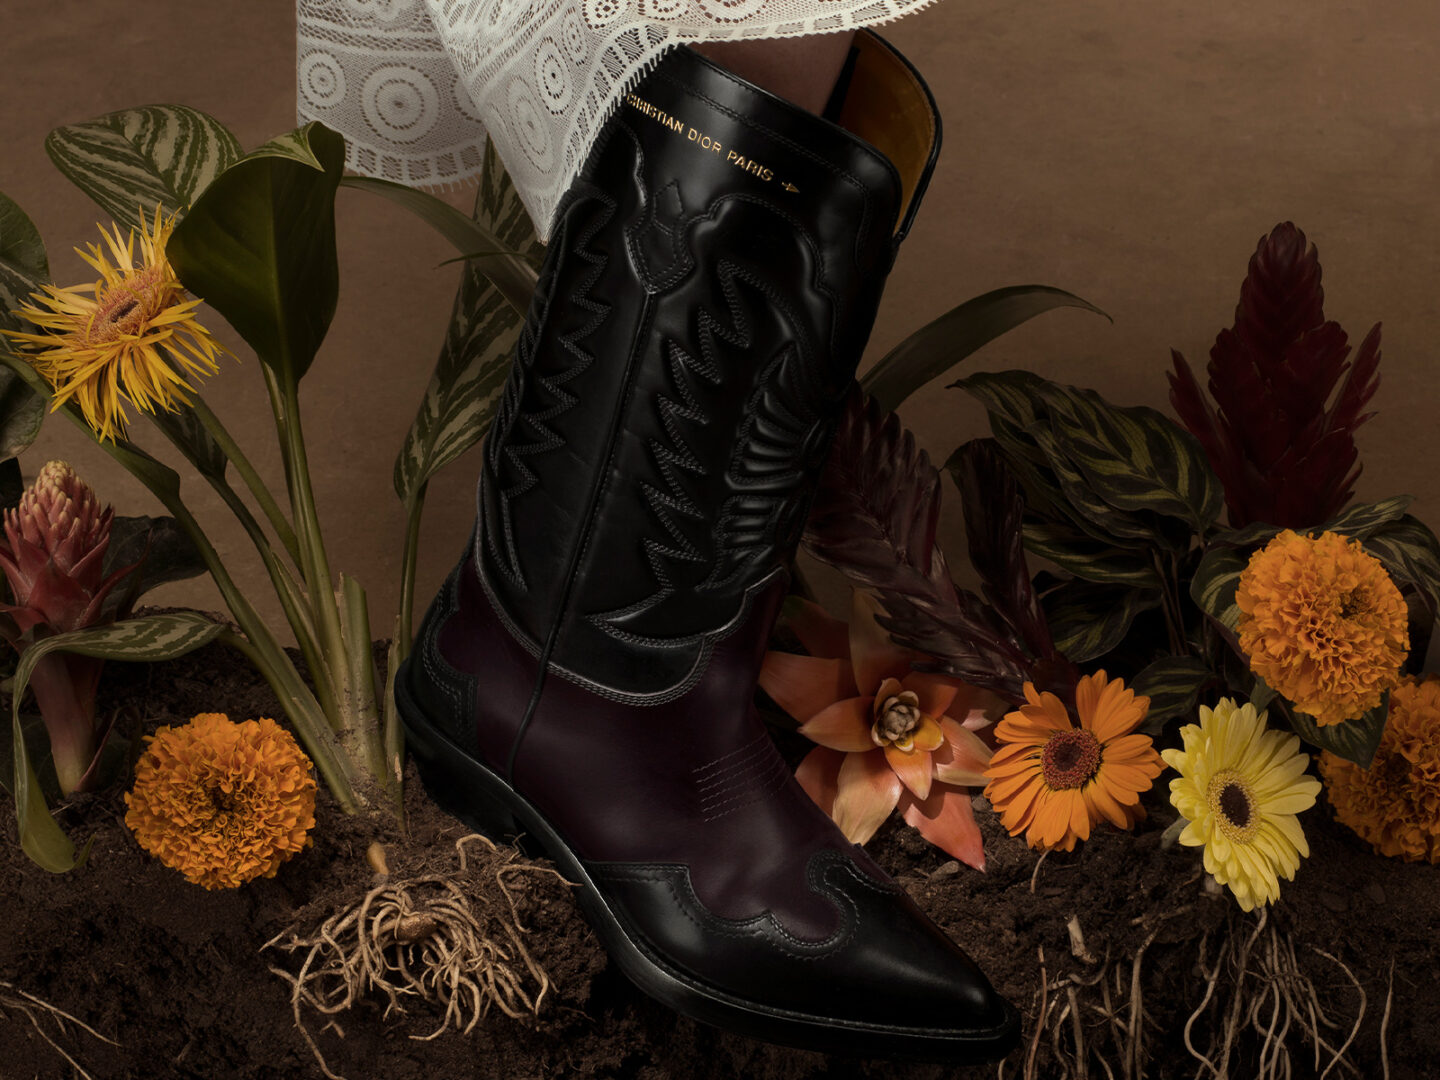 Looking for Cowboy boots? Dior has the ultimate options